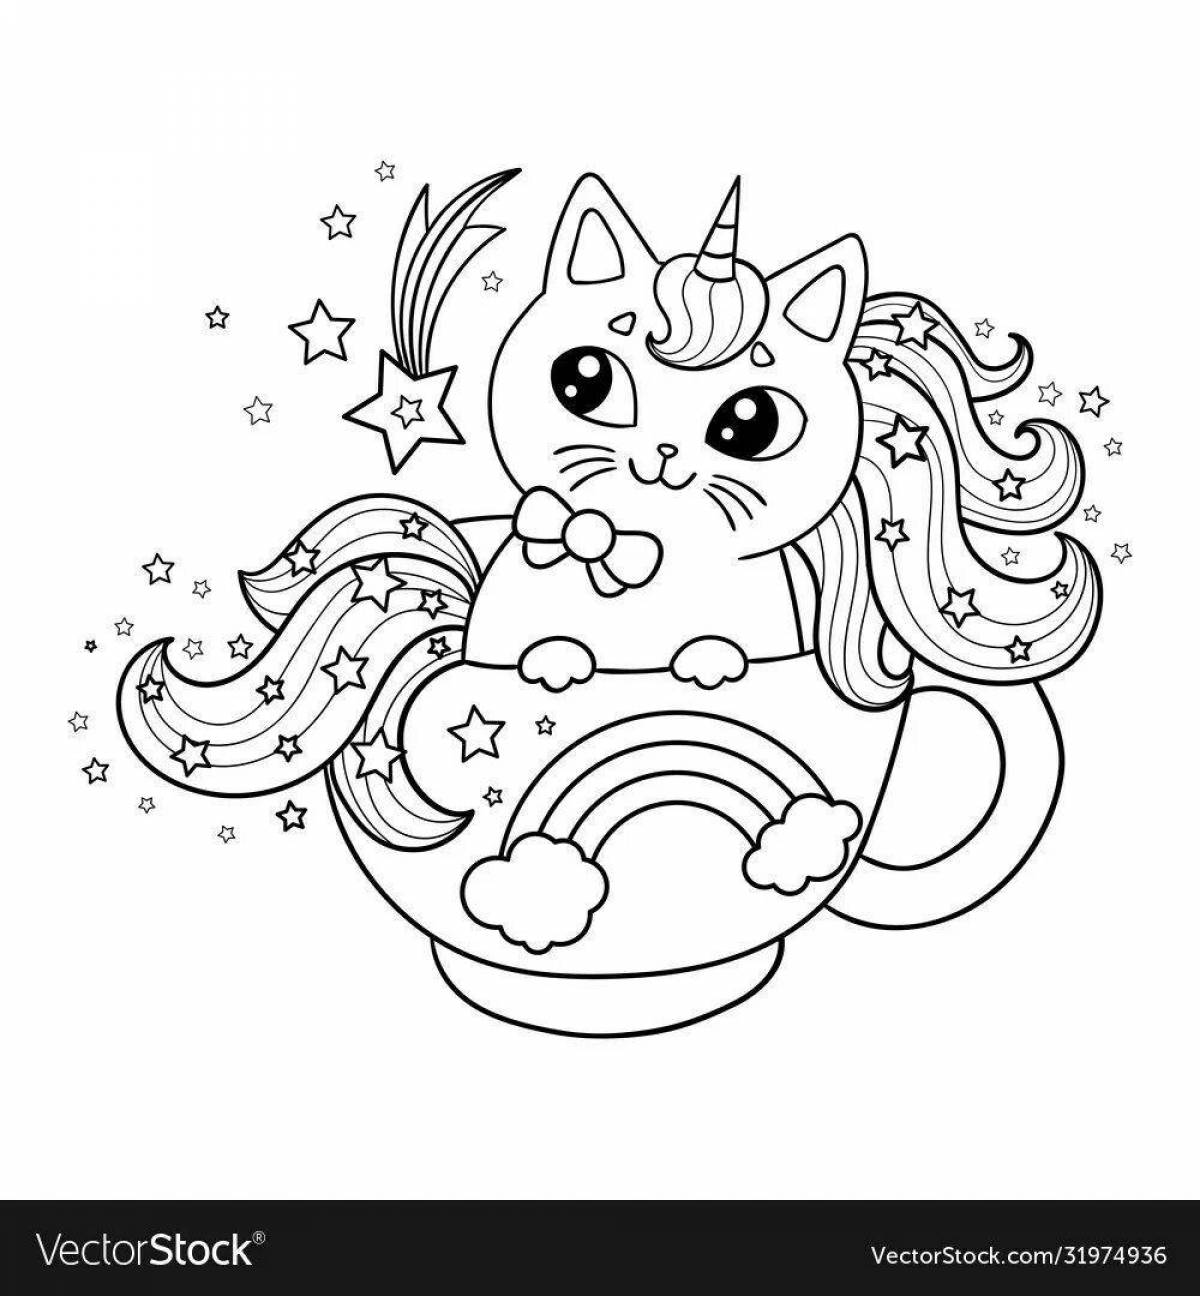 Rainbow kitten coloring page